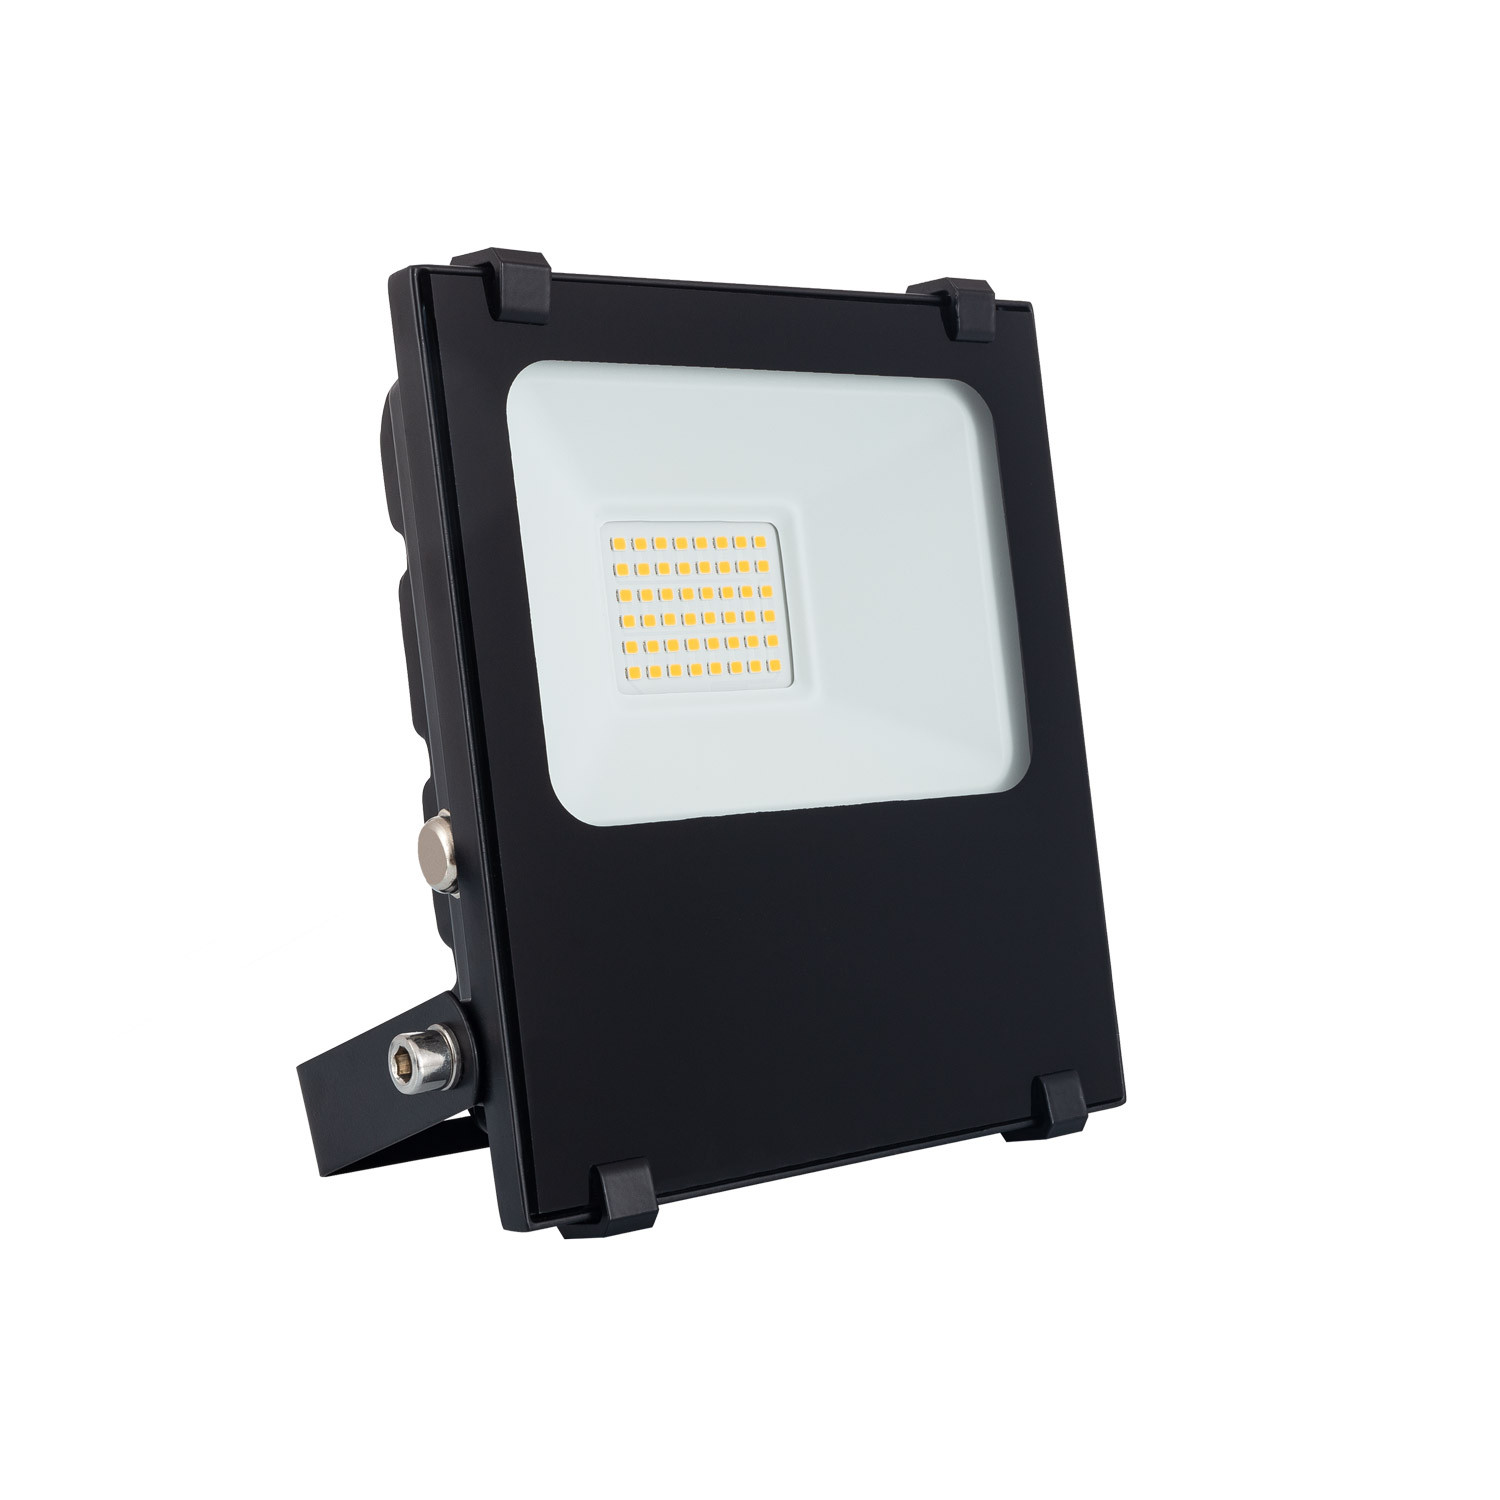 Product of 20W 145 lm/W HE PRO Dimmable LED Floodlight IP65